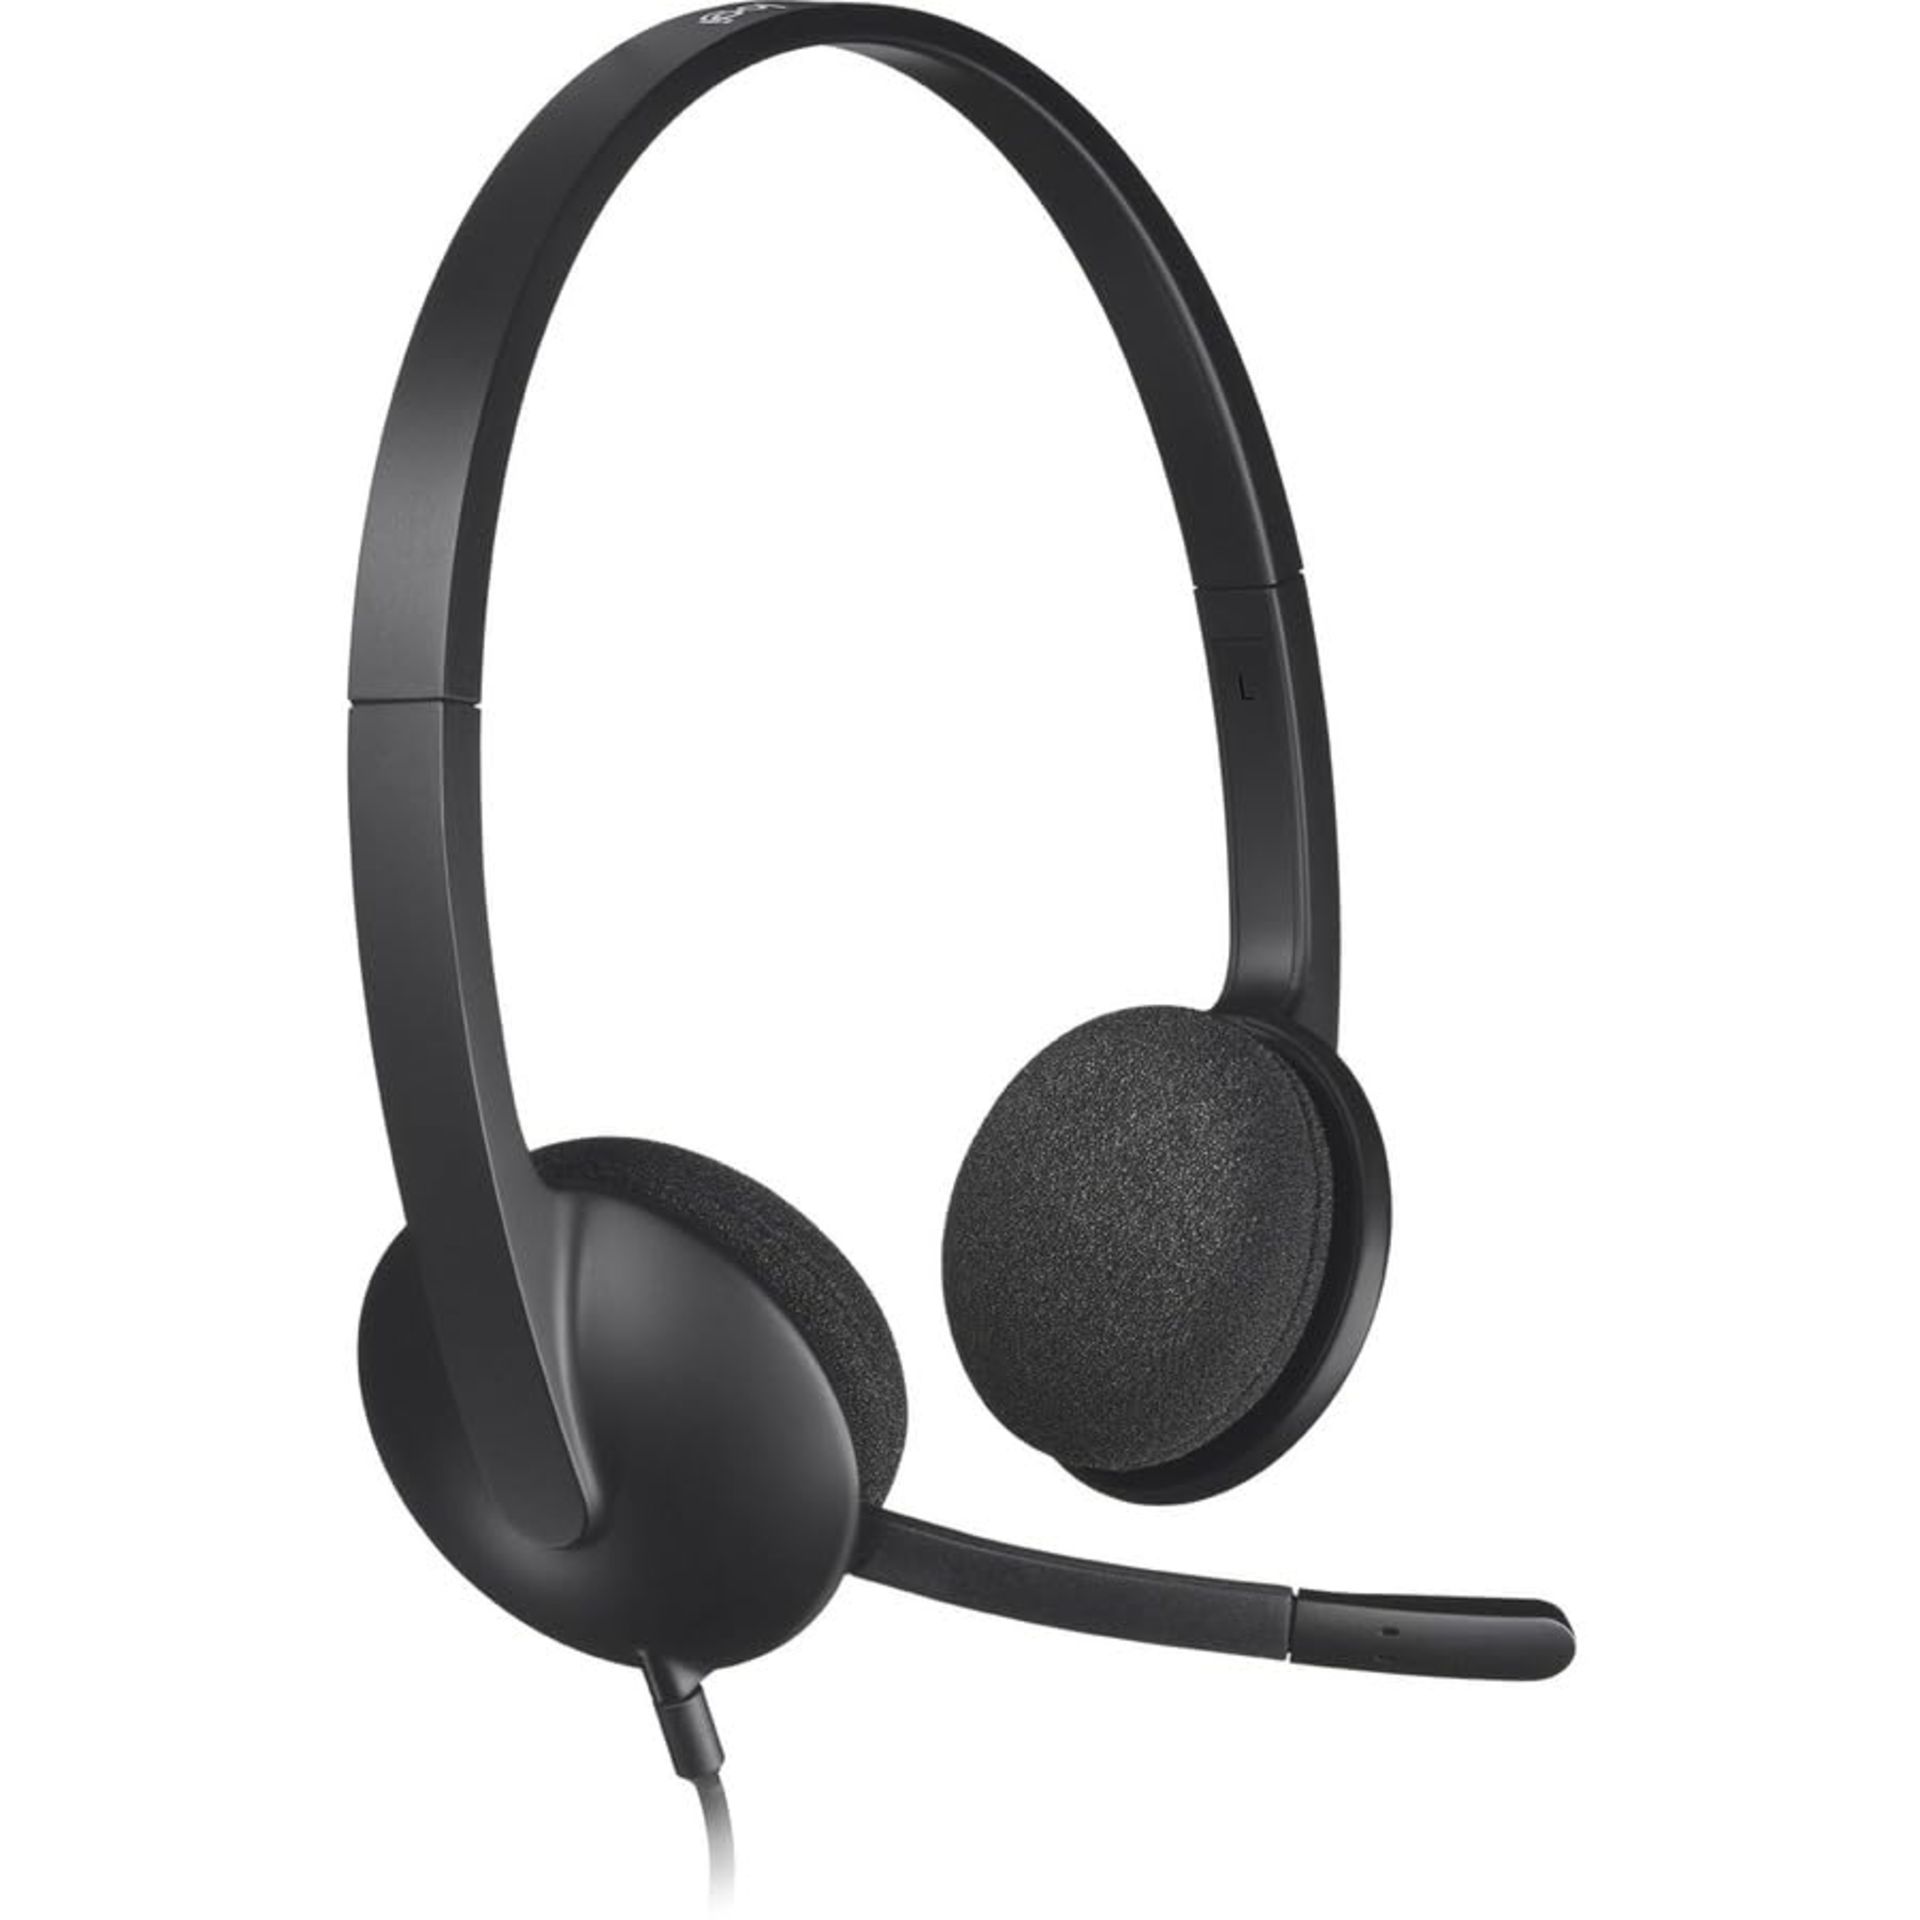 Logitech H340 Wired Headset, Stereo Headphones with Noise-Cancelling Microphone, USB,